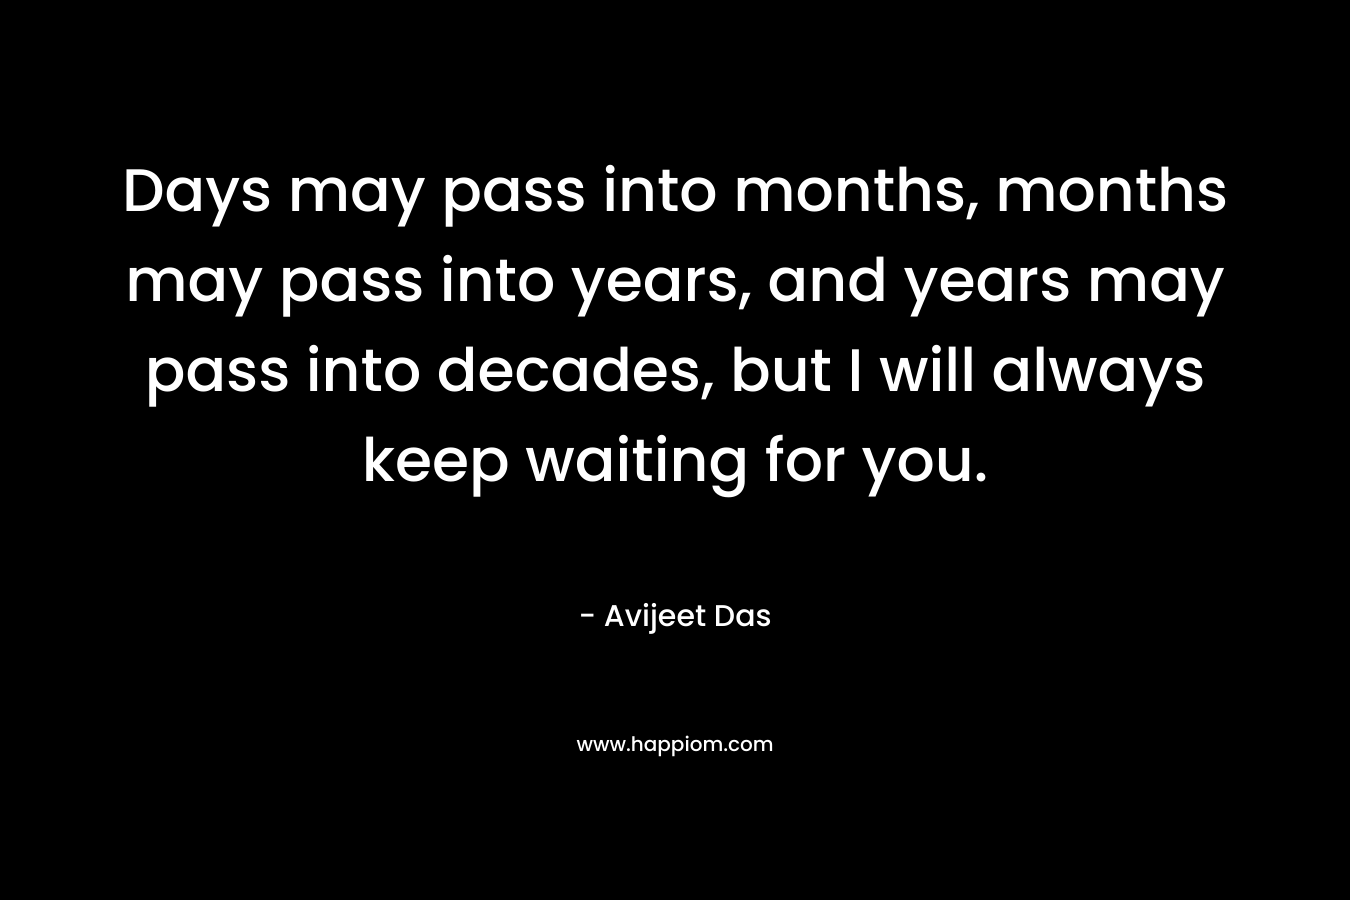 Days may pass into months, months may pass into years, and years may pass into decades, but I will always keep waiting for you.